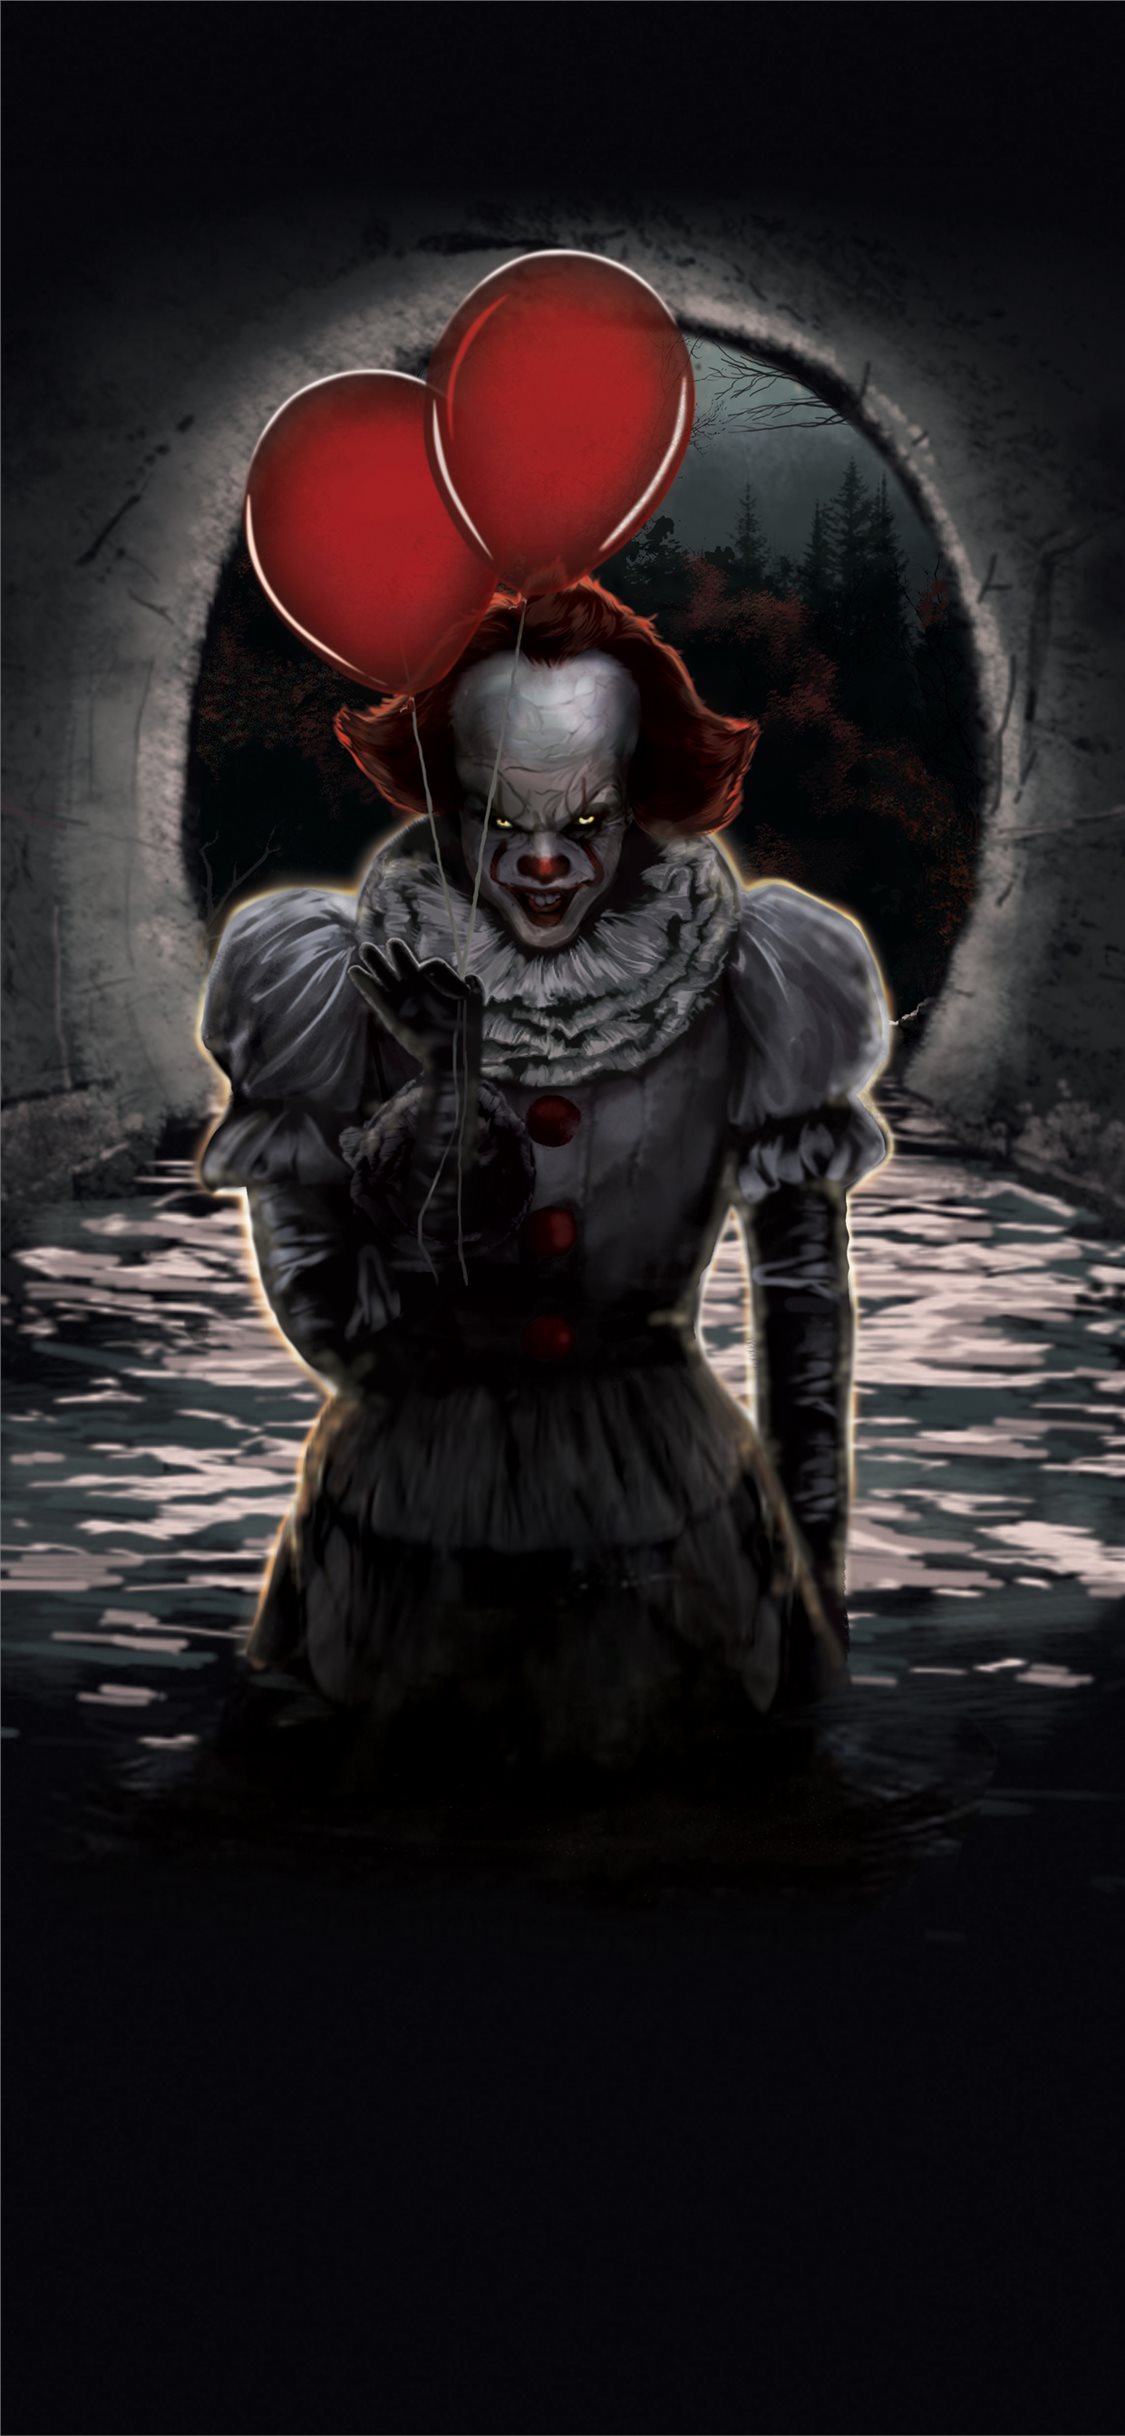 Pennywise Wallpaper For Iphone 5 - HD Wallpaper 